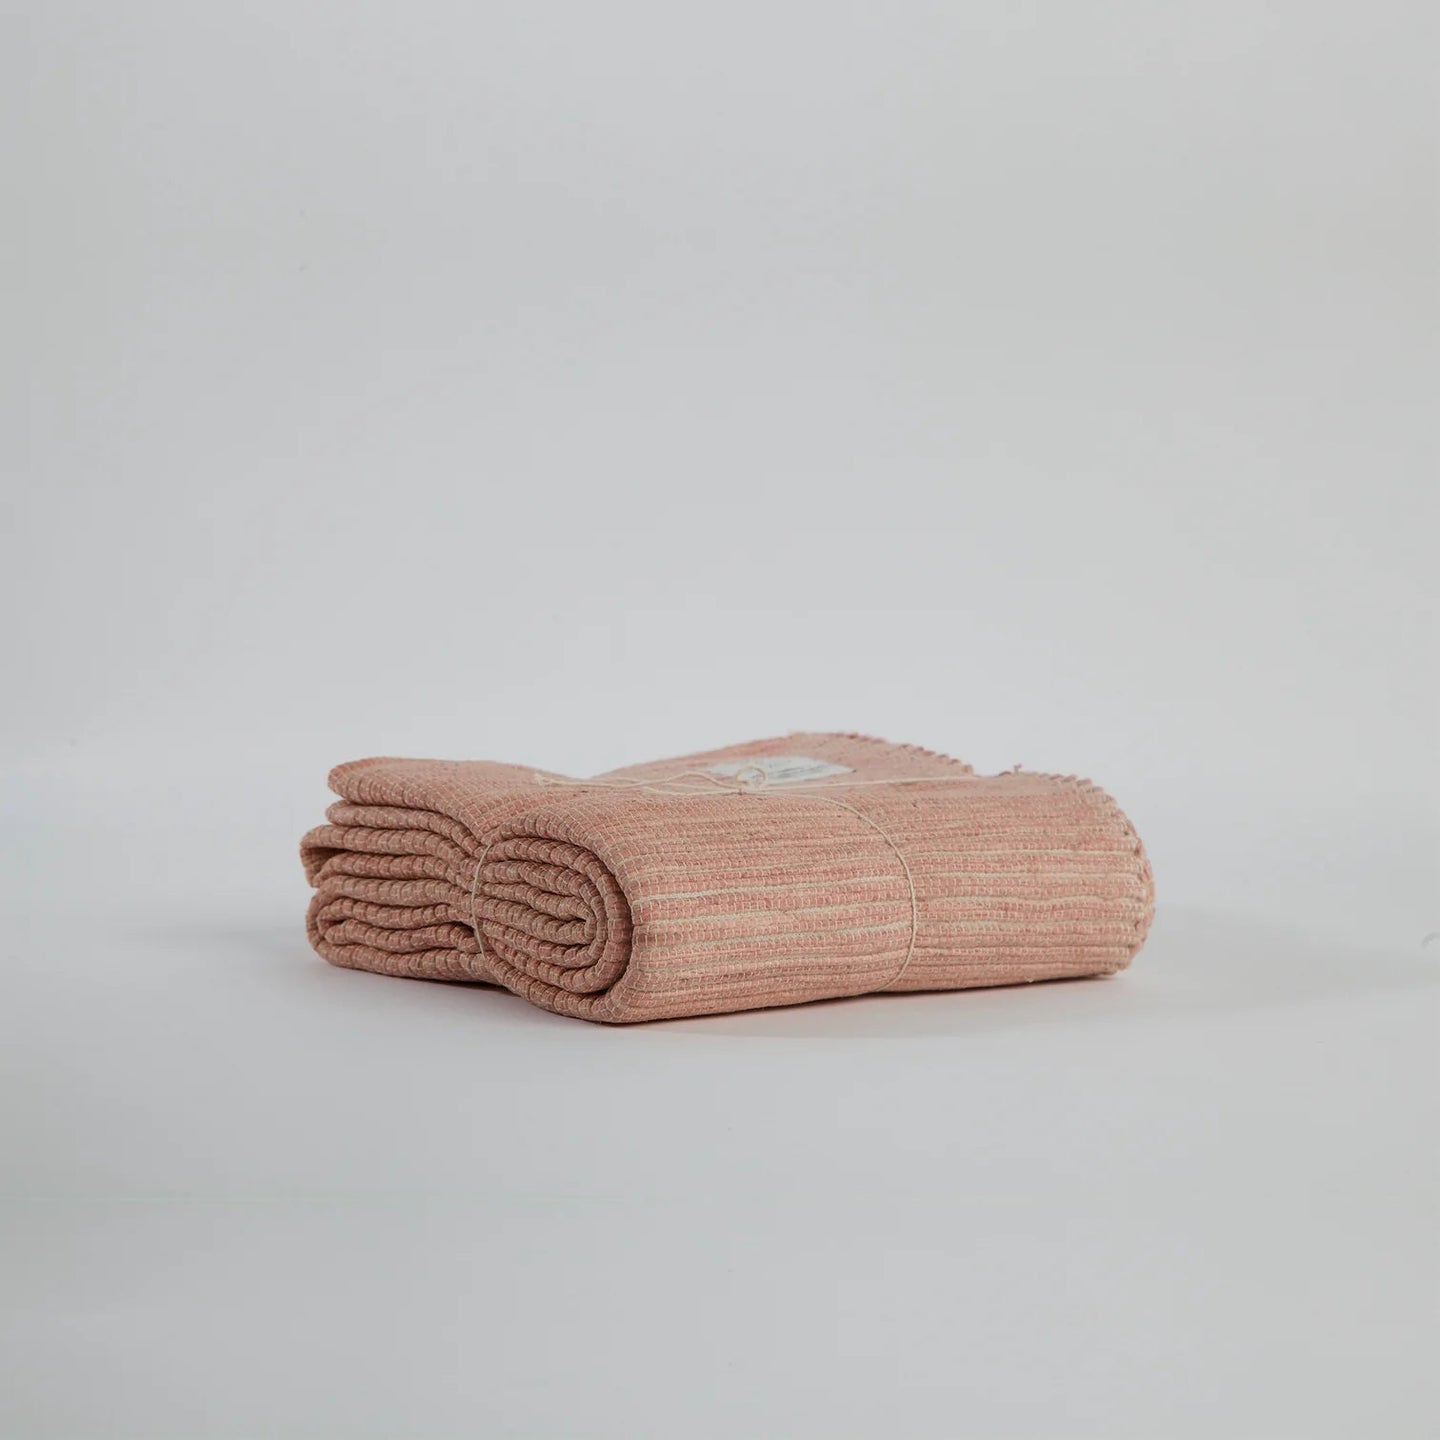 energising-detoxifying-yoga-mat-organic-cotton-natural-rubber-de-uria-the_home_of_sustainable_things